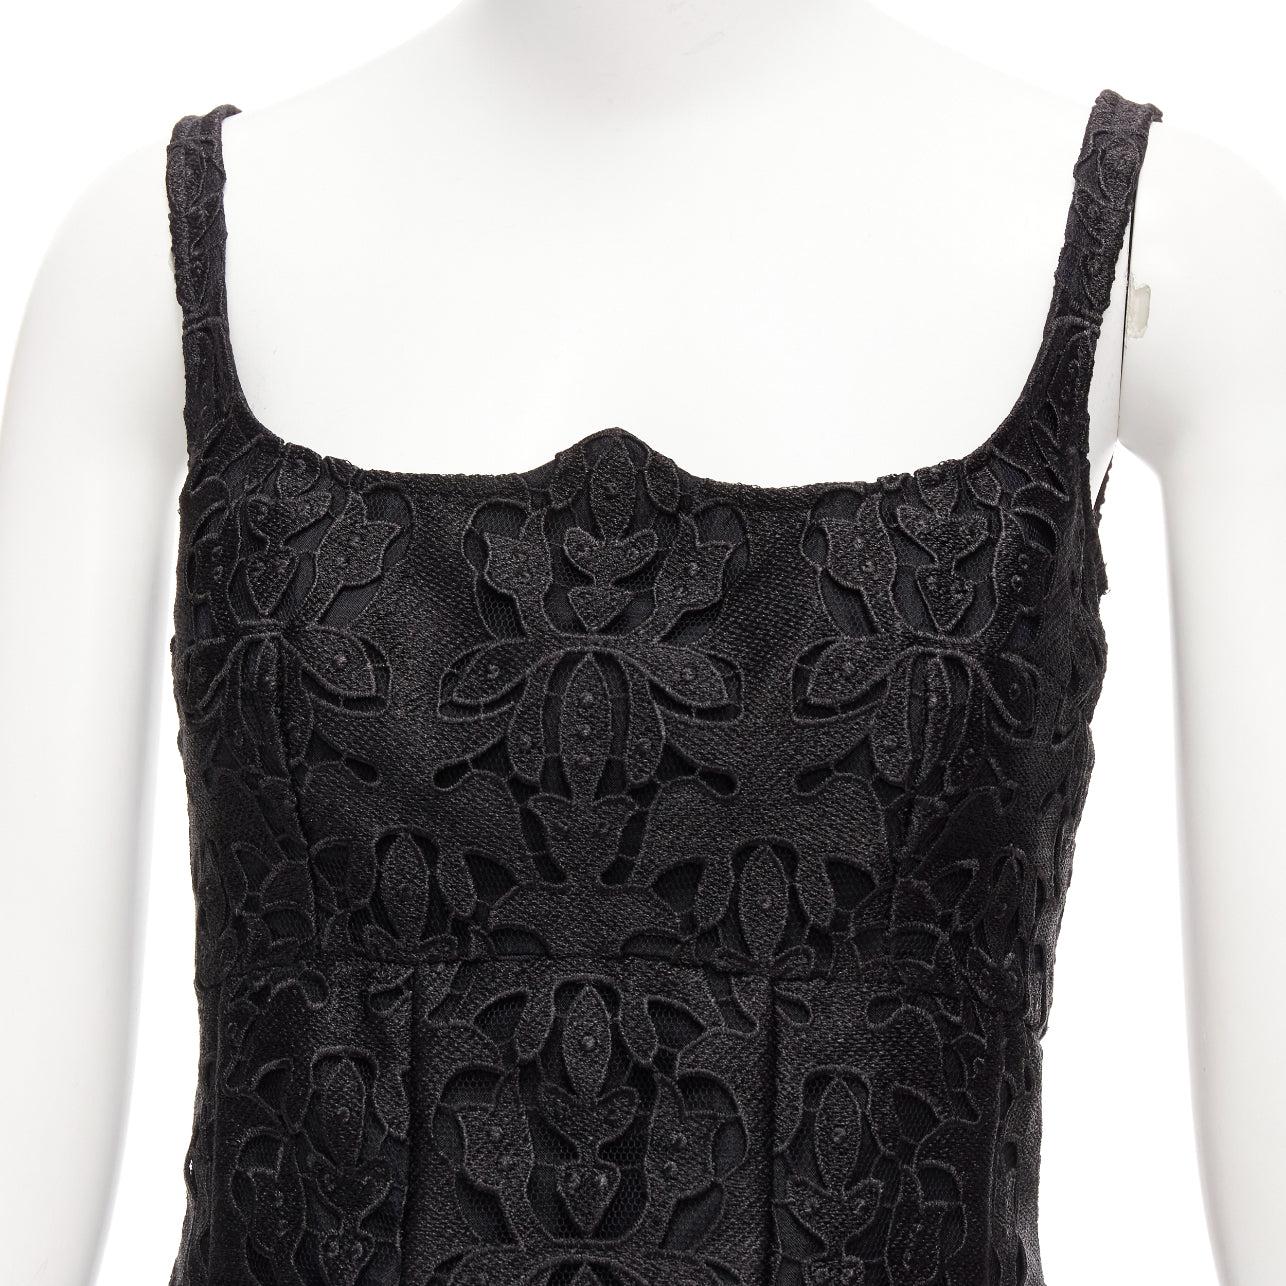 EMILIA WICKSTEAD black floral lace paisley scalloped neckline flared dress UK8 S
Reference: LNKO/A02332
Brand: Emilia Wickstead
Material: Polyester
Color: Black
Pattern: Lace
Closure: Zip
Lining: Black Polyester
Extra Details: The retro feel of the